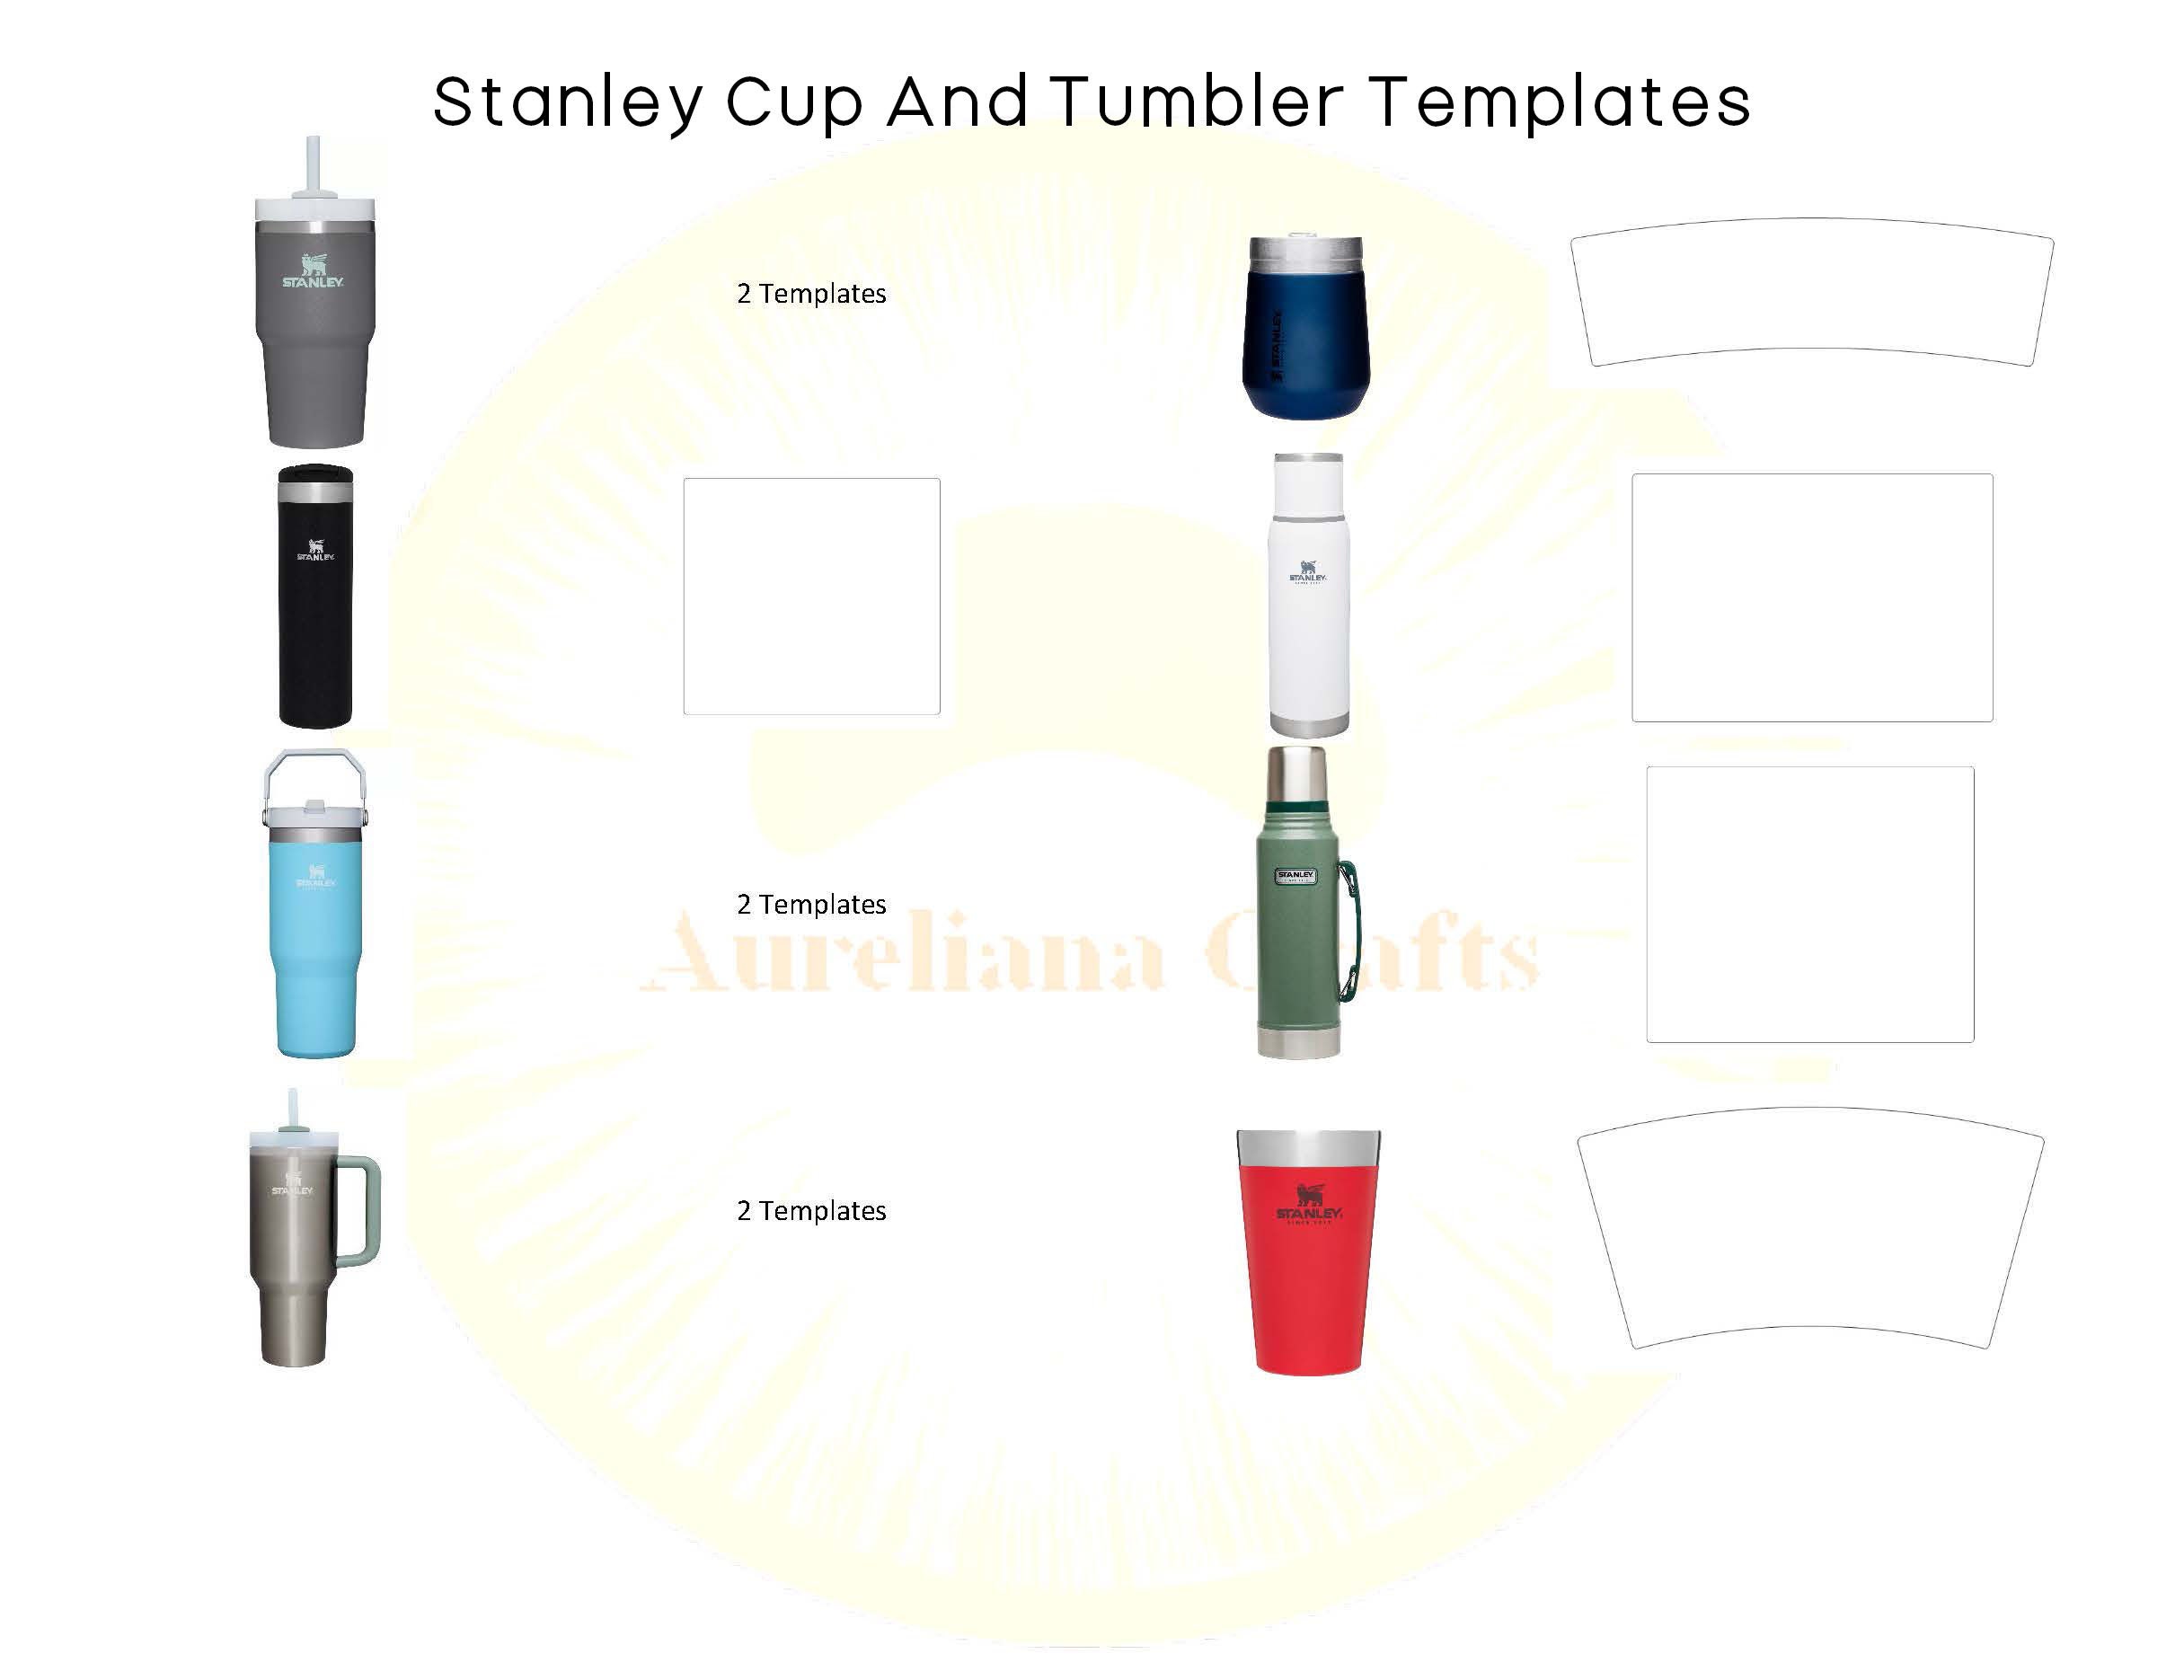 Stanley 30oz Quencher Wrap Template SVG JPG PNG Digital Download Tumbler  Template Adventure Quencher Guide 30oz Stanley Accessories 